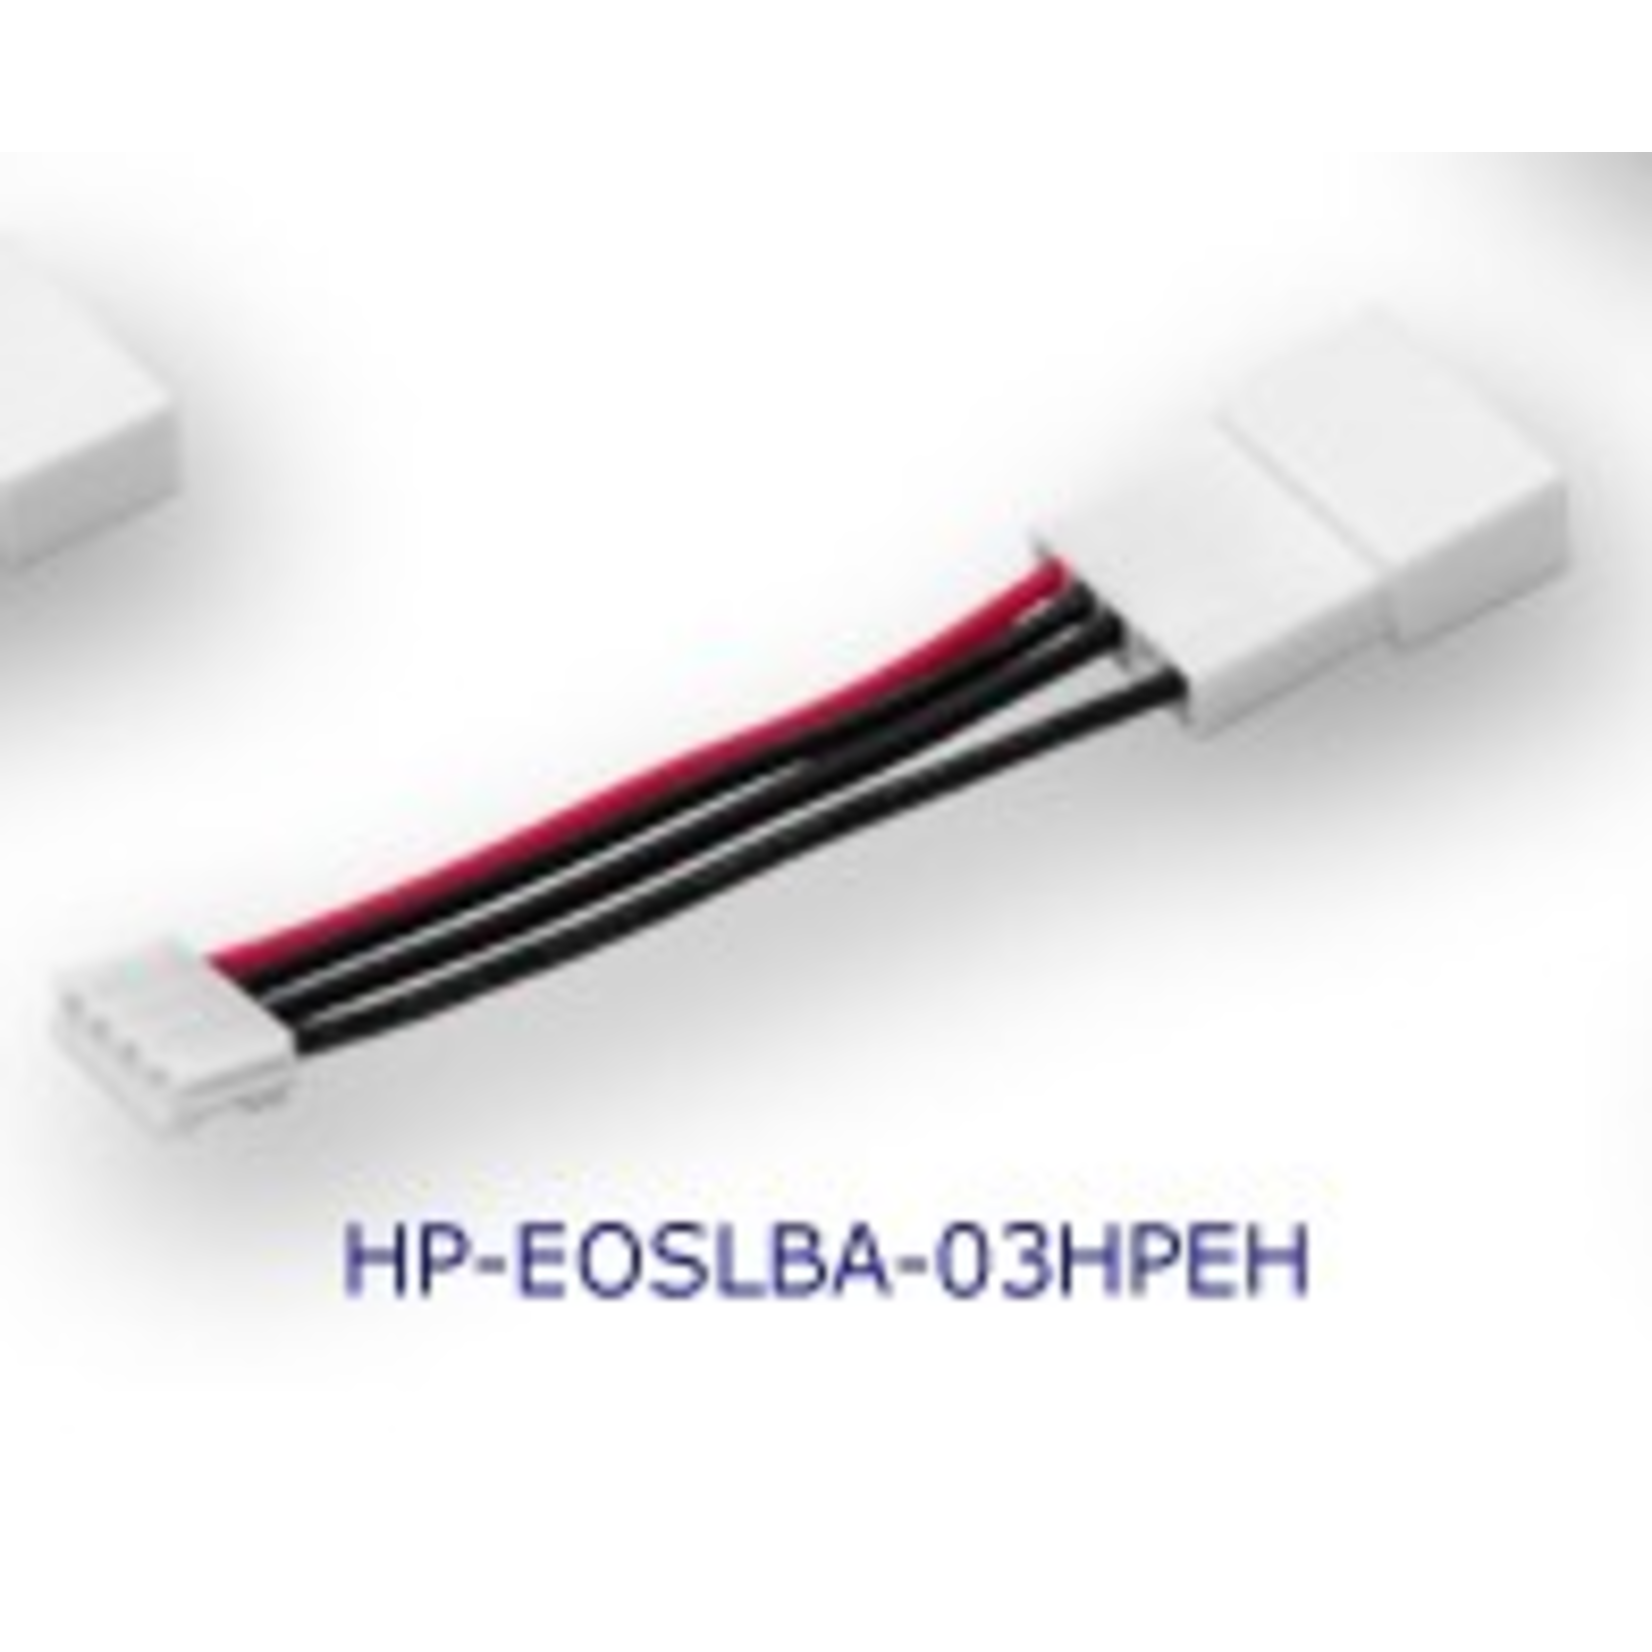 Hyperion Hyperion 3S Adapter for LiPo/LiFe to JST XH Chargers #HP-EOSLBA-03HPXH